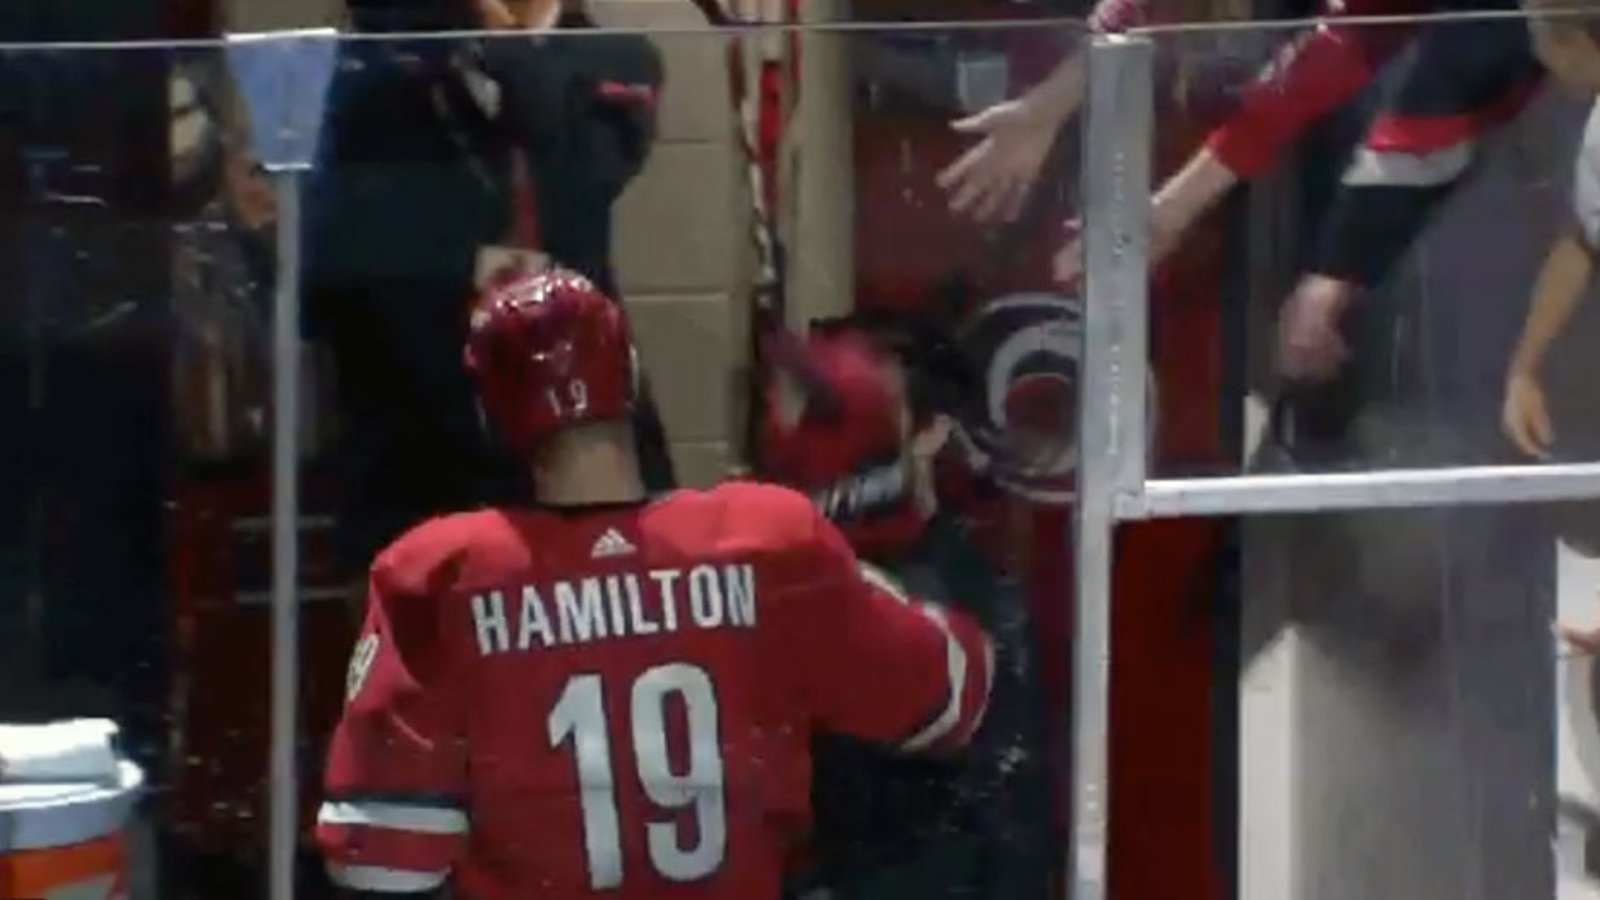 Dougie Hamilton takes out Hurricanes trainer with shot “below the belt”